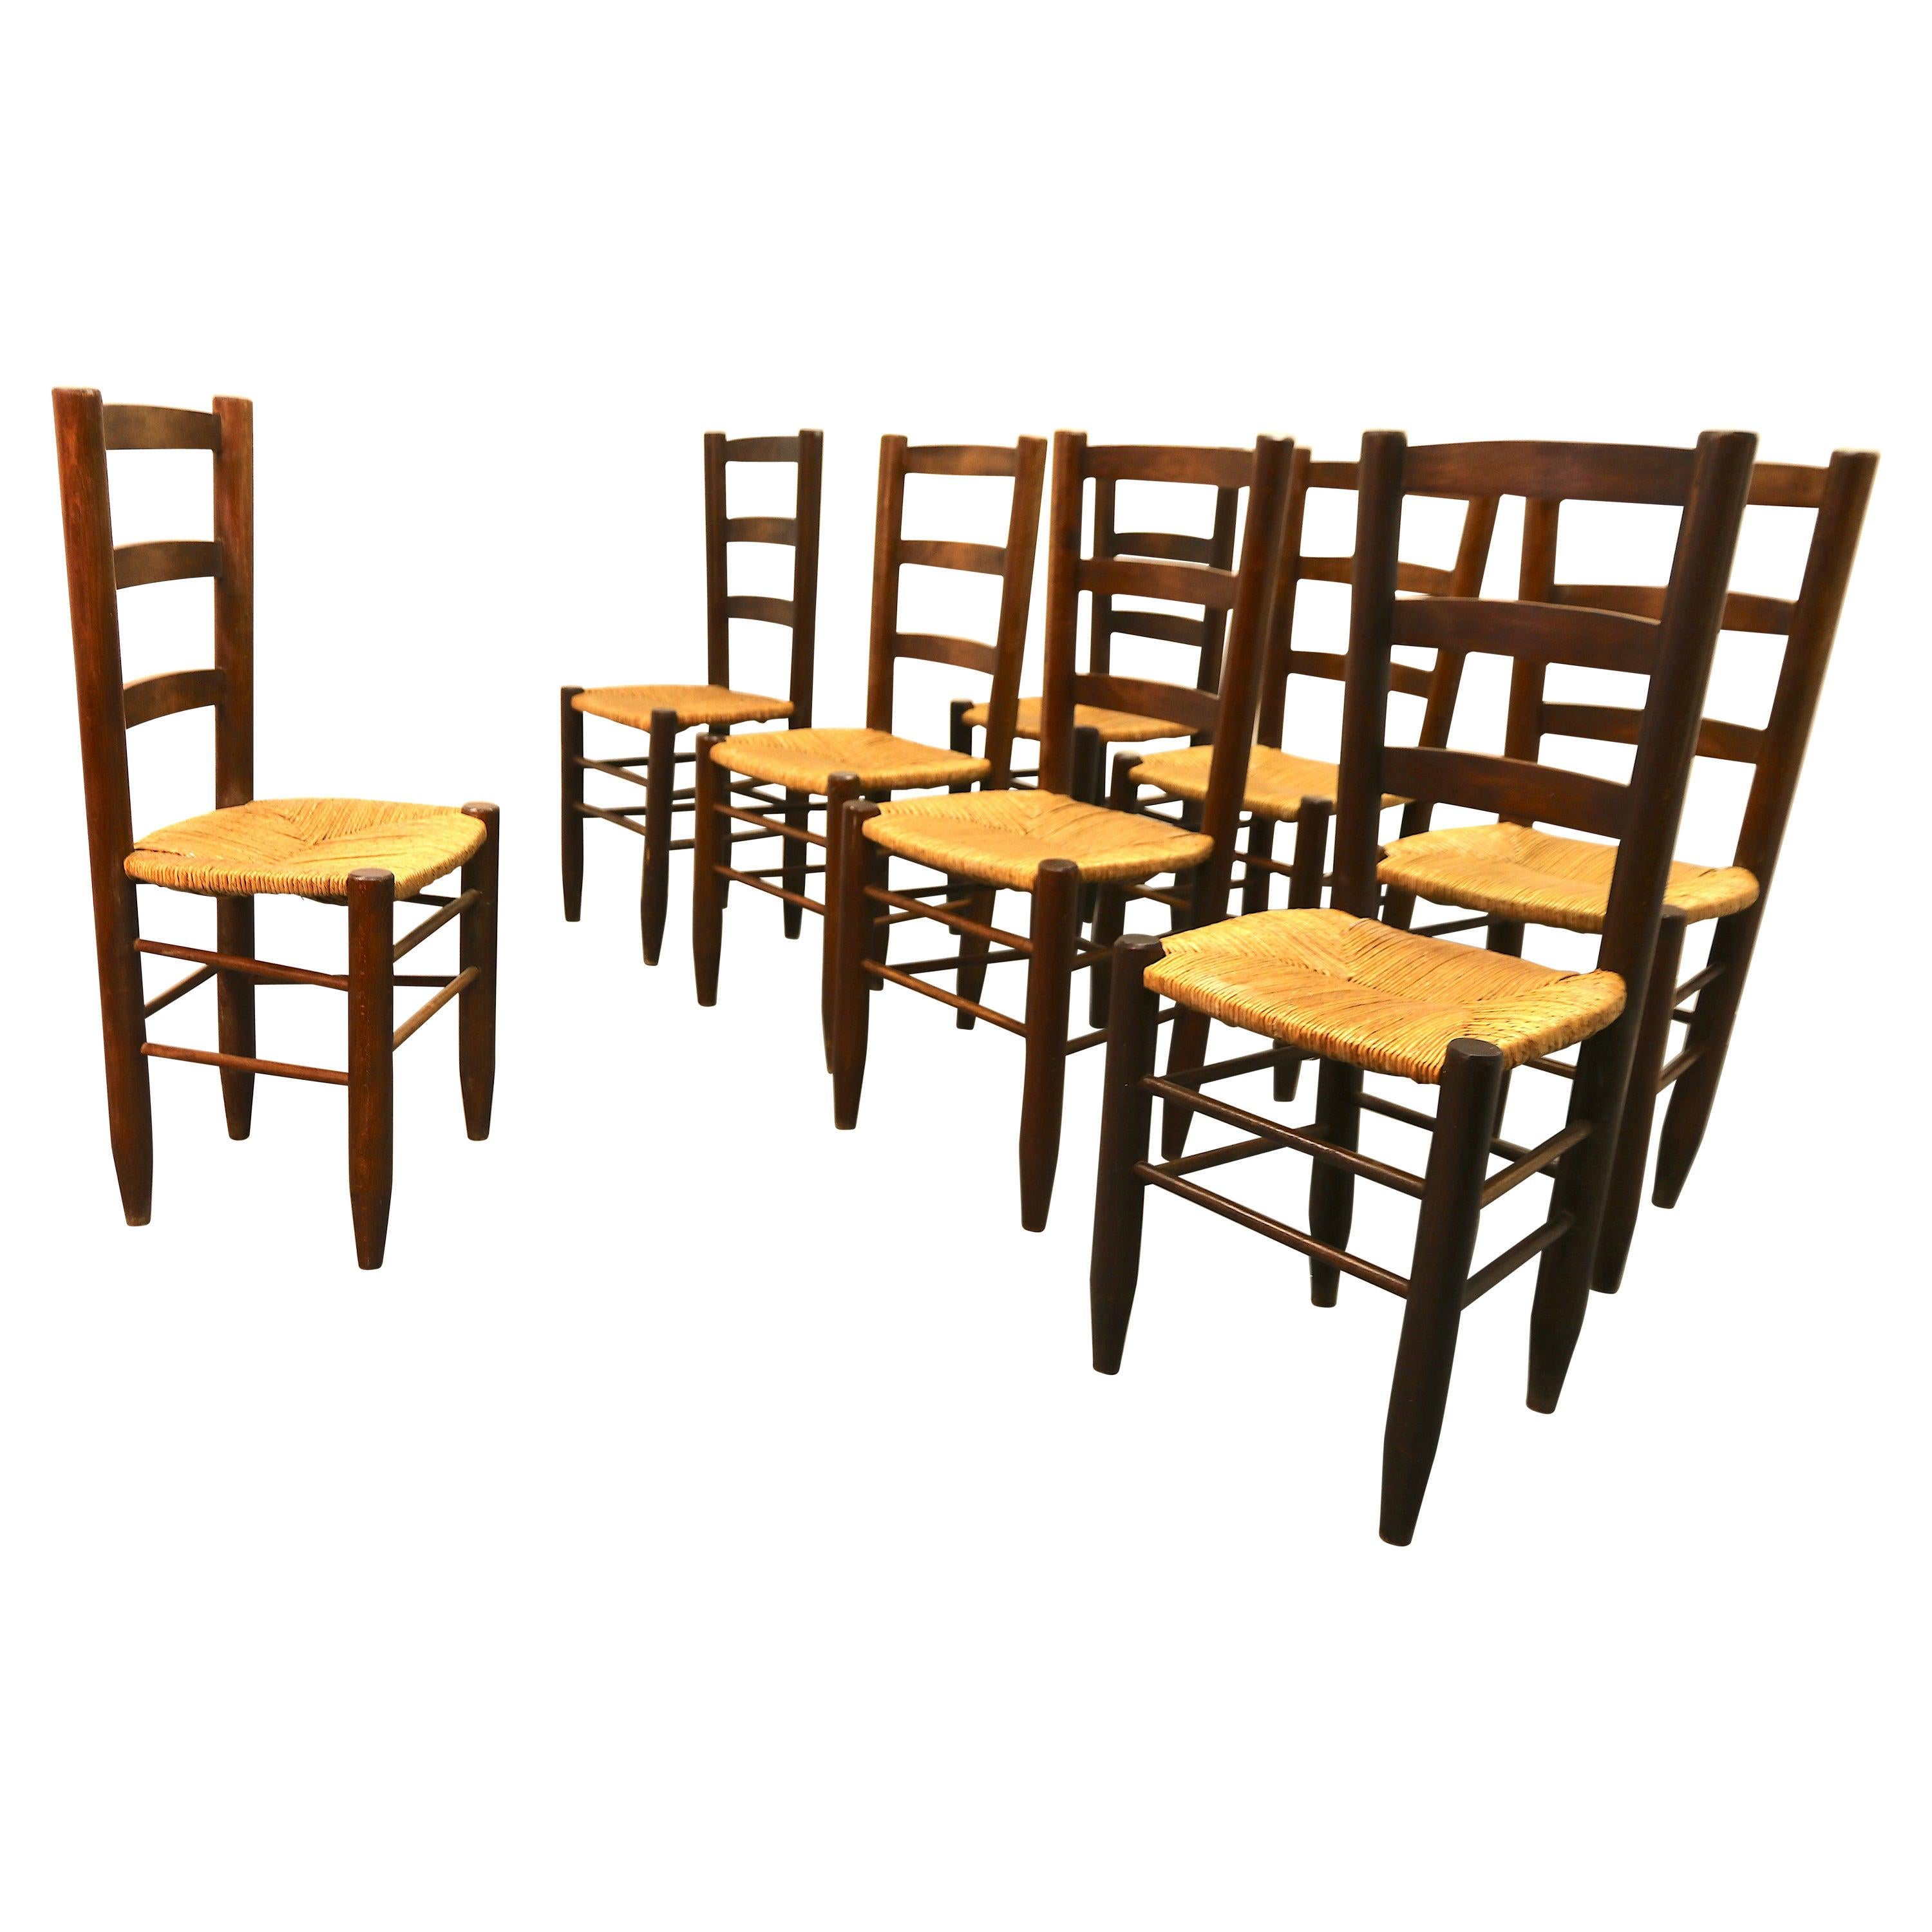 Charlotte Perriand Model No. 19 Set of 8 Solid Wood and Rush Dining Room Chairs